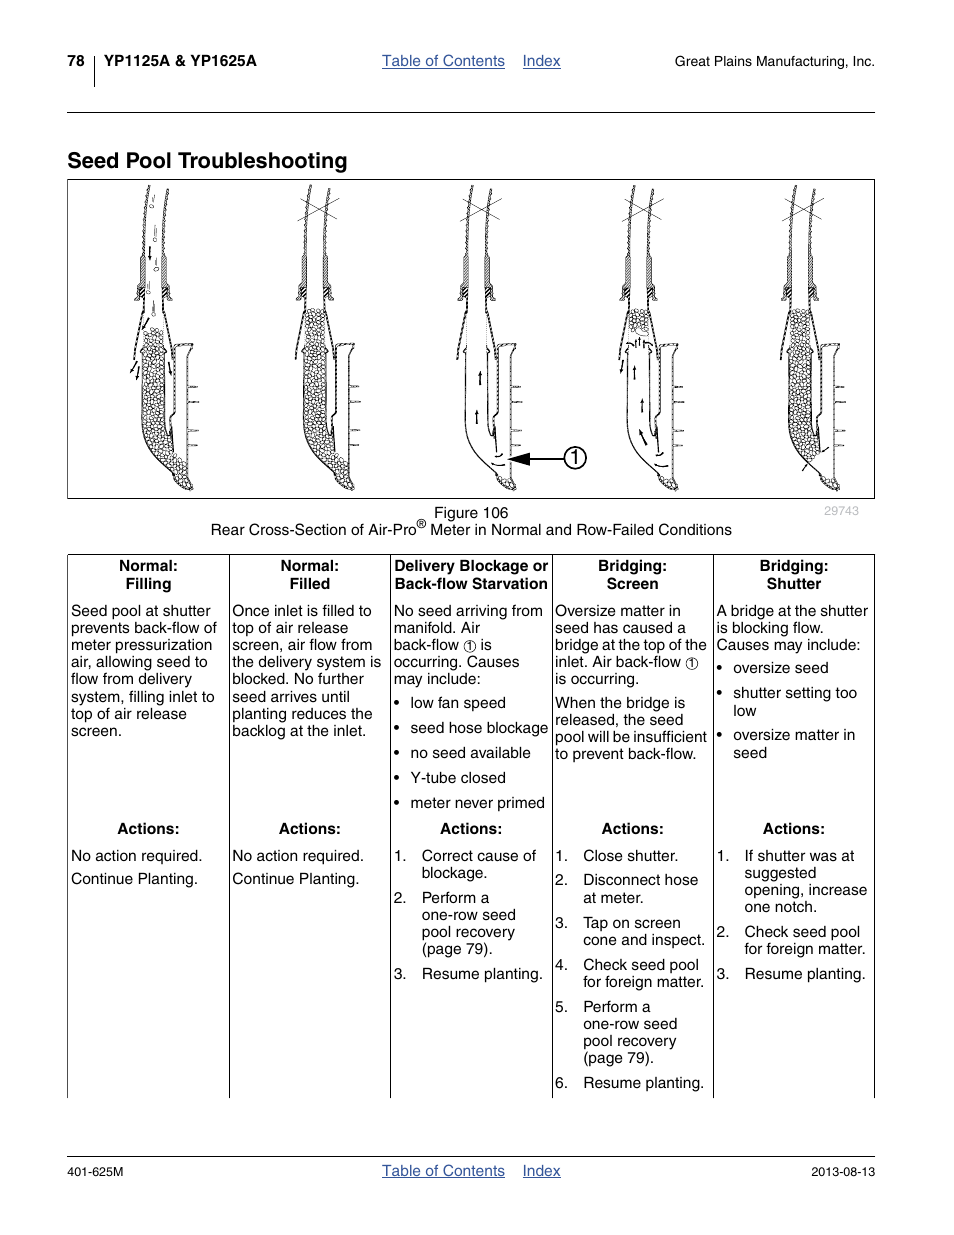 Seed pool troubleshooting | Great Plains YP1625A Operator Manual User Manual | Page 82 / 172